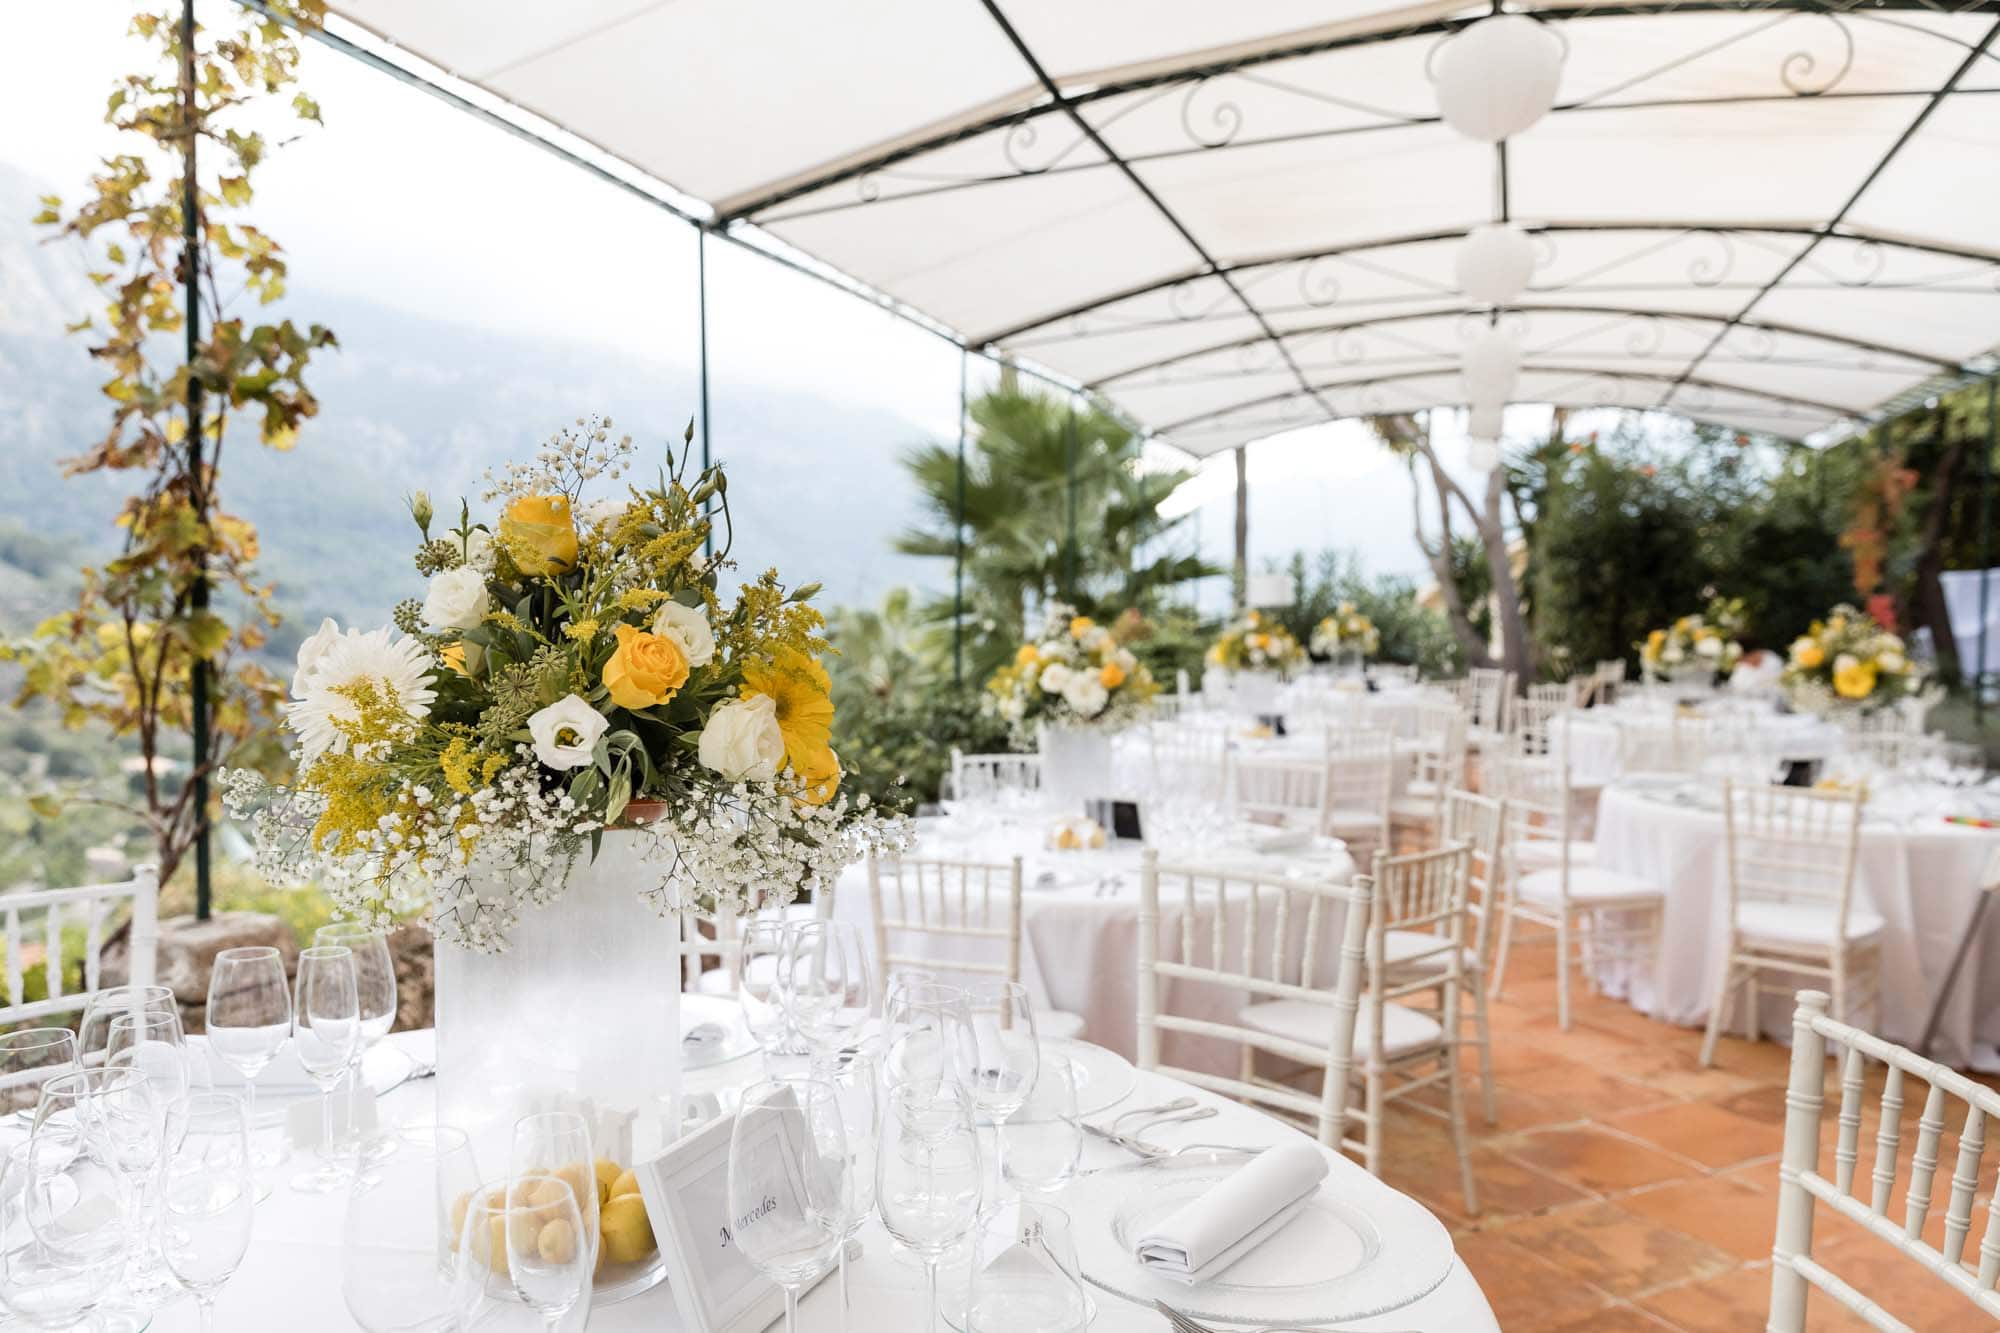 The beautiful terrace at the boutique hotel Can Verdera waiting for the wedding guests